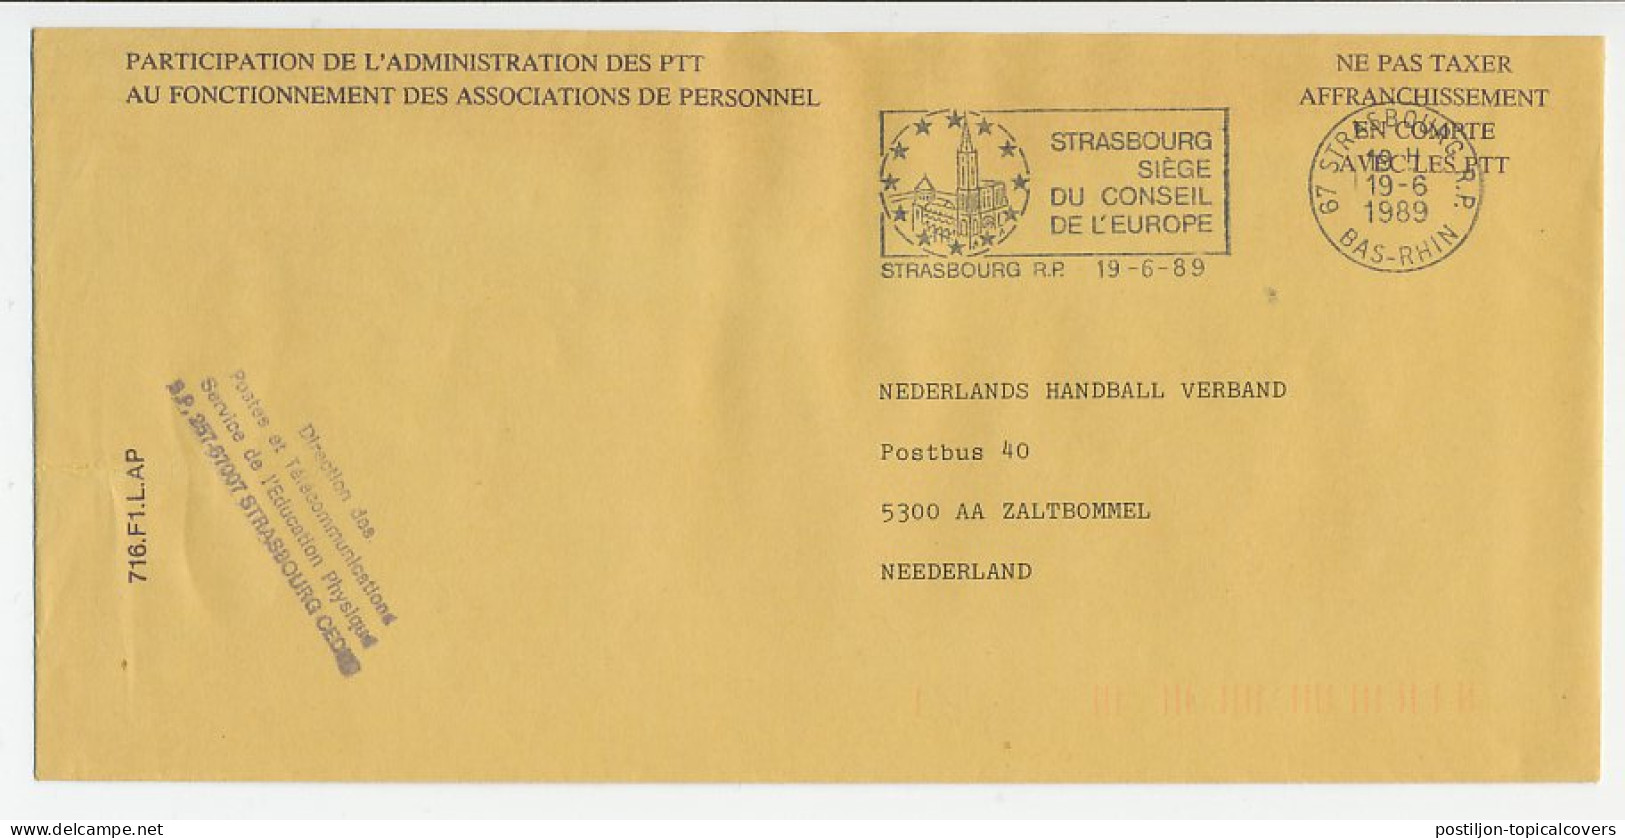 Service Cover / Postmark France 1989 Strasbourg Seat Of The Council Of Europe - Instituciones Europeas